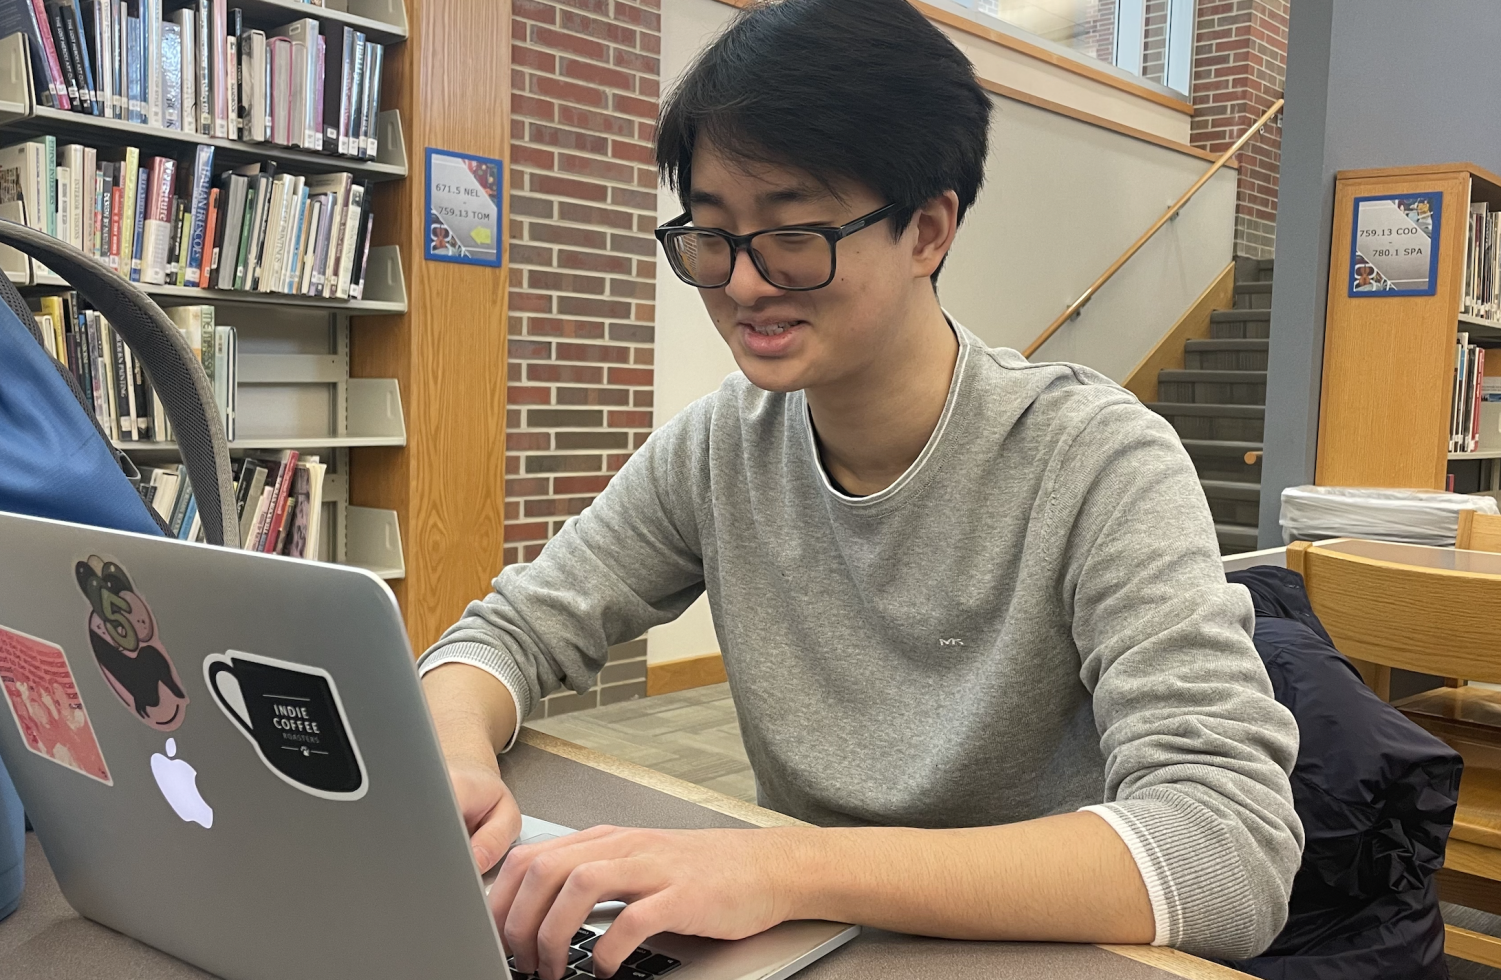 Senior Eric Yang works on homework during his release block. As a member of the Transition to College (TCP) Program, Yang comes in and out of the school multiple times a day, and thinks the safety of school entry can be improved.